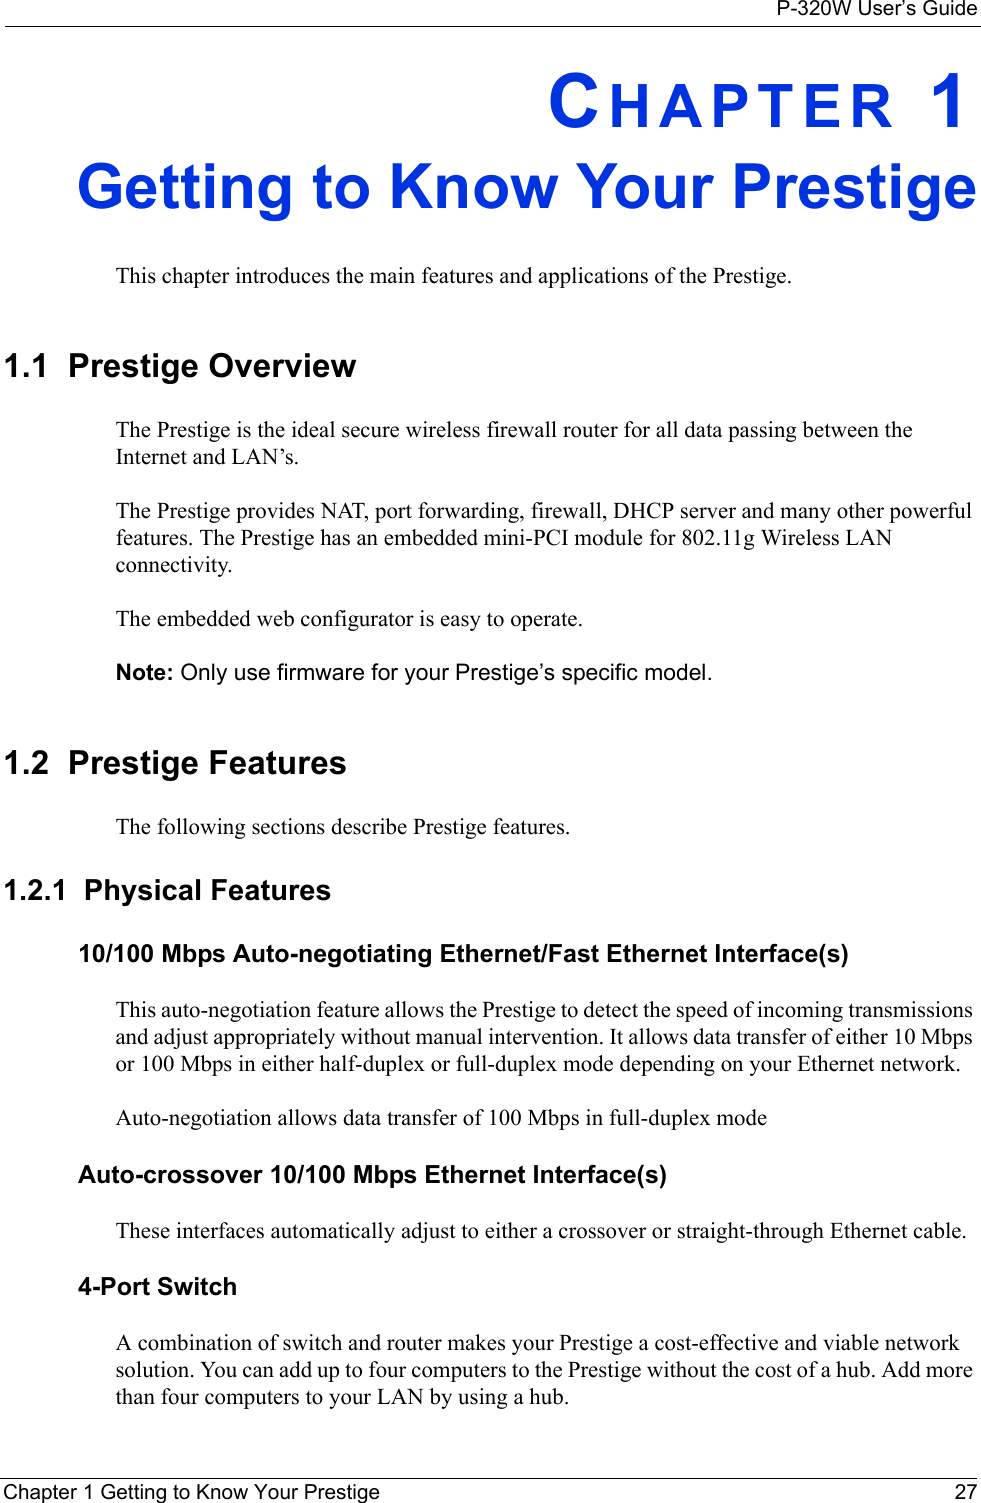 P-320W User’s GuideChapter 1 Getting to Know Your Prestige 27CHAPTER 1Getting to Know Your PrestigeThis chapter introduces the main features and applications of the Prestige.1.1  Prestige OverviewThe Prestige is the ideal secure wireless firewall router for all data passing between the Internet and LAN’s.The Prestige provides NAT, port forwarding, firewall, DHCP server and many other powerful features. The Prestige has an embedded mini-PCI module for 802.11g Wireless LAN connectivity.The embedded web configurator is easy to operate.Note: Only use firmware for your Prestige’s specific model.1.2  Prestige FeaturesThe following sections describe Prestige features. 1.2.1  Physical Features10/100 Mbps Auto-negotiating Ethernet/Fast Ethernet Interface(s)This auto-negotiation feature allows the Prestige to detect the speed of incoming transmissions and adjust appropriately without manual intervention. It allows data transfer of either 10 Mbps or 100 Mbps in either half-duplex or full-duplex mode depending on your Ethernet network.Auto-negotiation allows data transfer of 100 Mbps in full-duplex modeAuto-crossover 10/100 Mbps Ethernet Interface(s)These interfaces automatically adjust to either a crossover or straight-through Ethernet cable.4-Port SwitchA combination of switch and router makes your Prestige a cost-effective and viable network solution. You can add up to four computers to the Prestige without the cost of a hub. Add more than four computers to your LAN by using a hub.